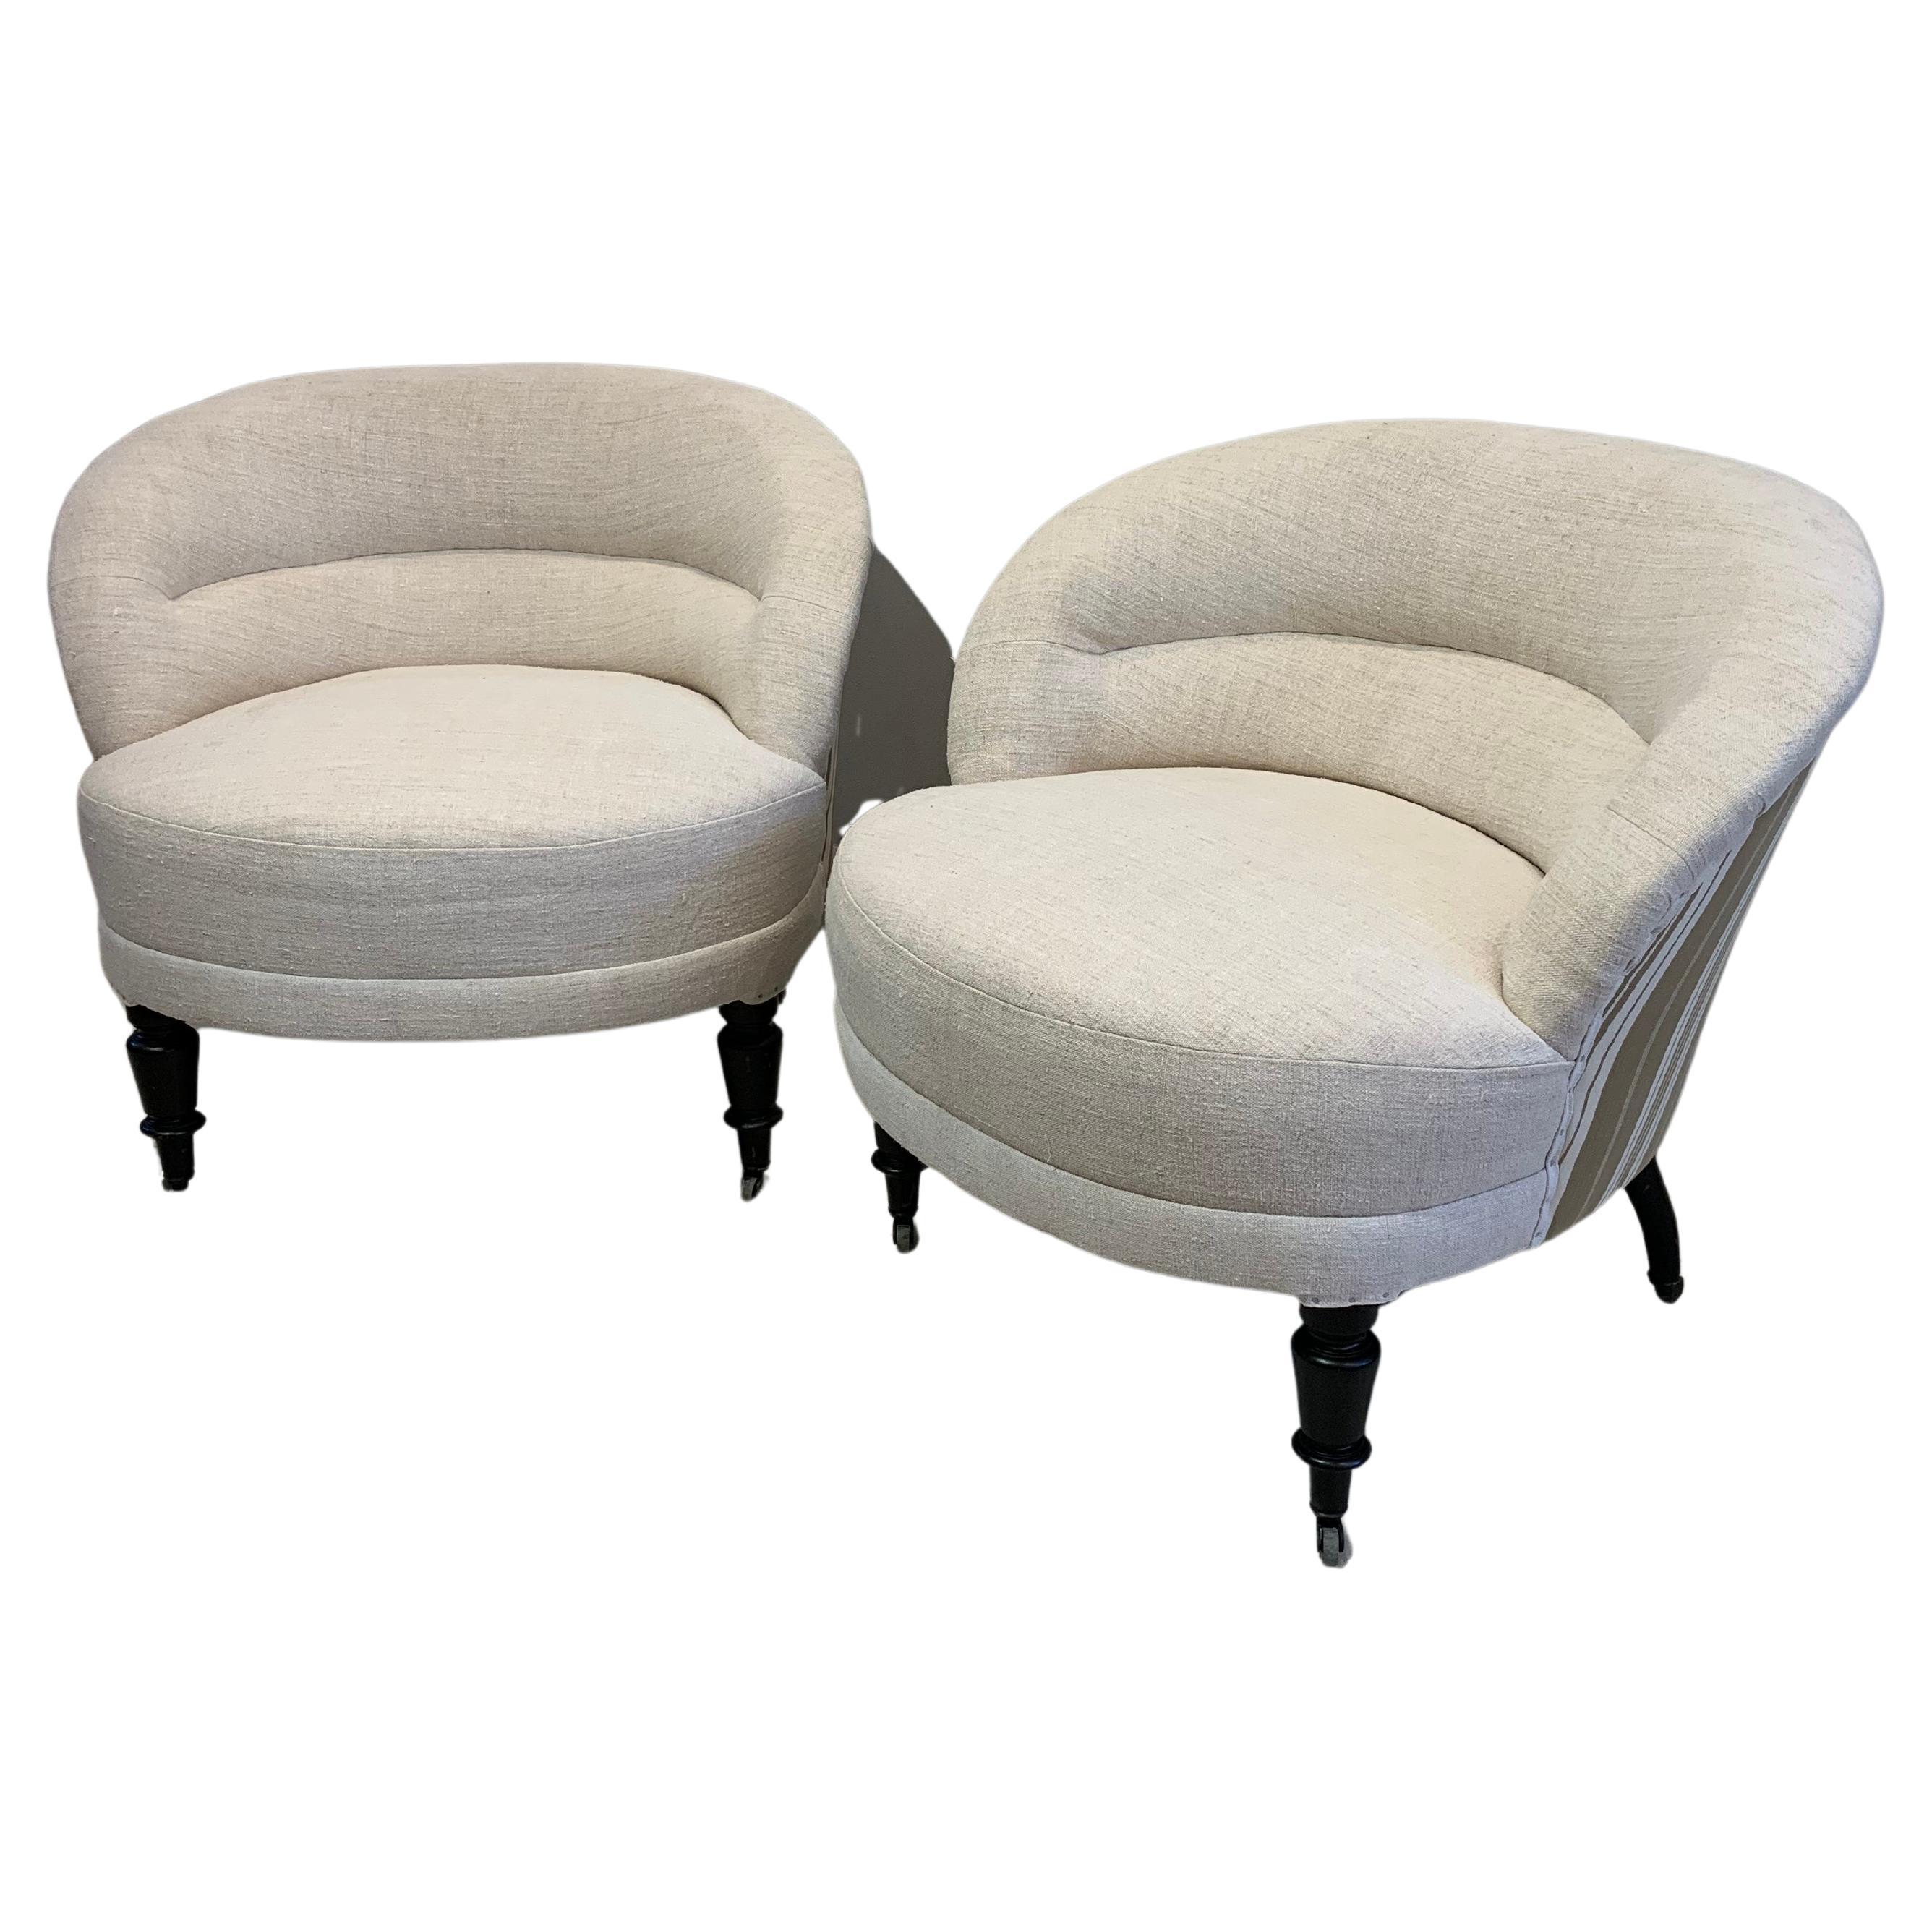 A pair circa 19th century Napoleon III comfortable and substantial upholstered armchairs covered in neutral slubby French linen with a contrasting antique french ticking at the back.

The lounge chairs feature curved low backs and typical ebonised